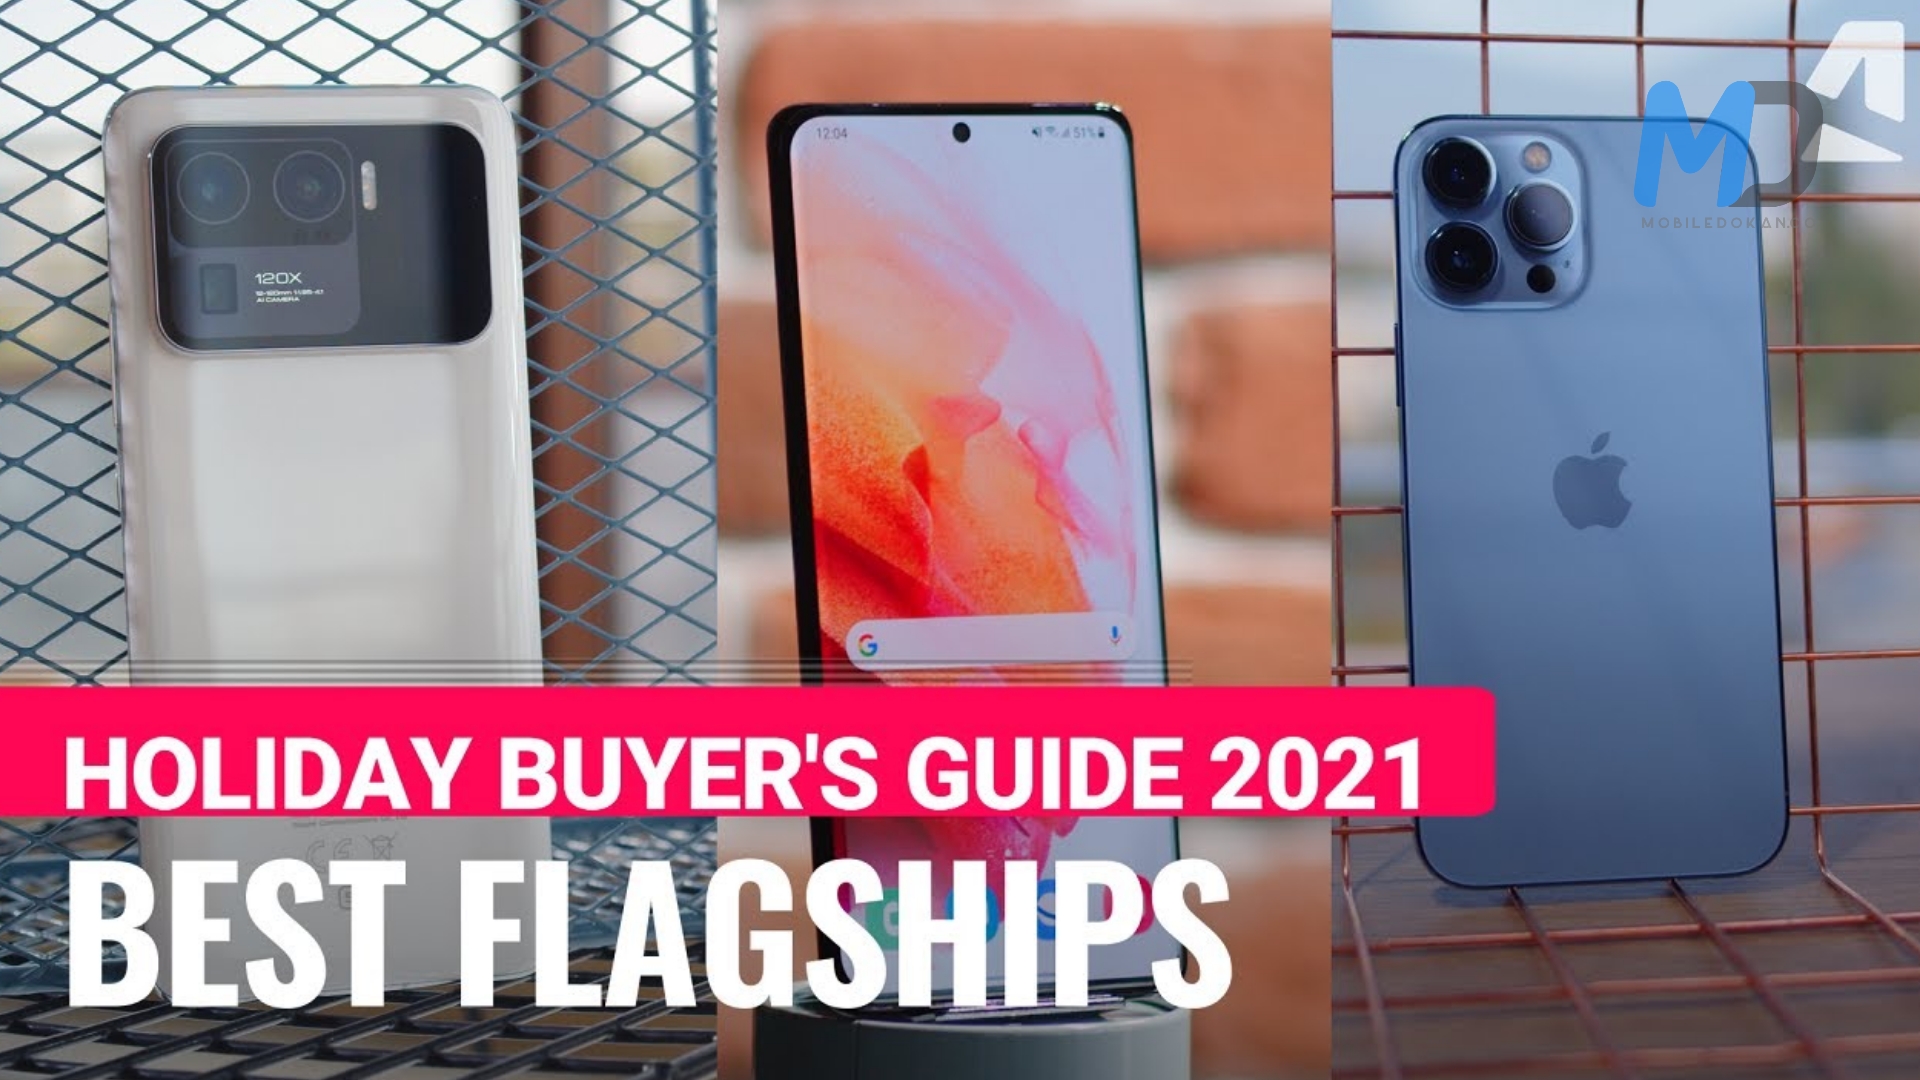 The best flagships and flagship killers to get for the Holiday season of 2021